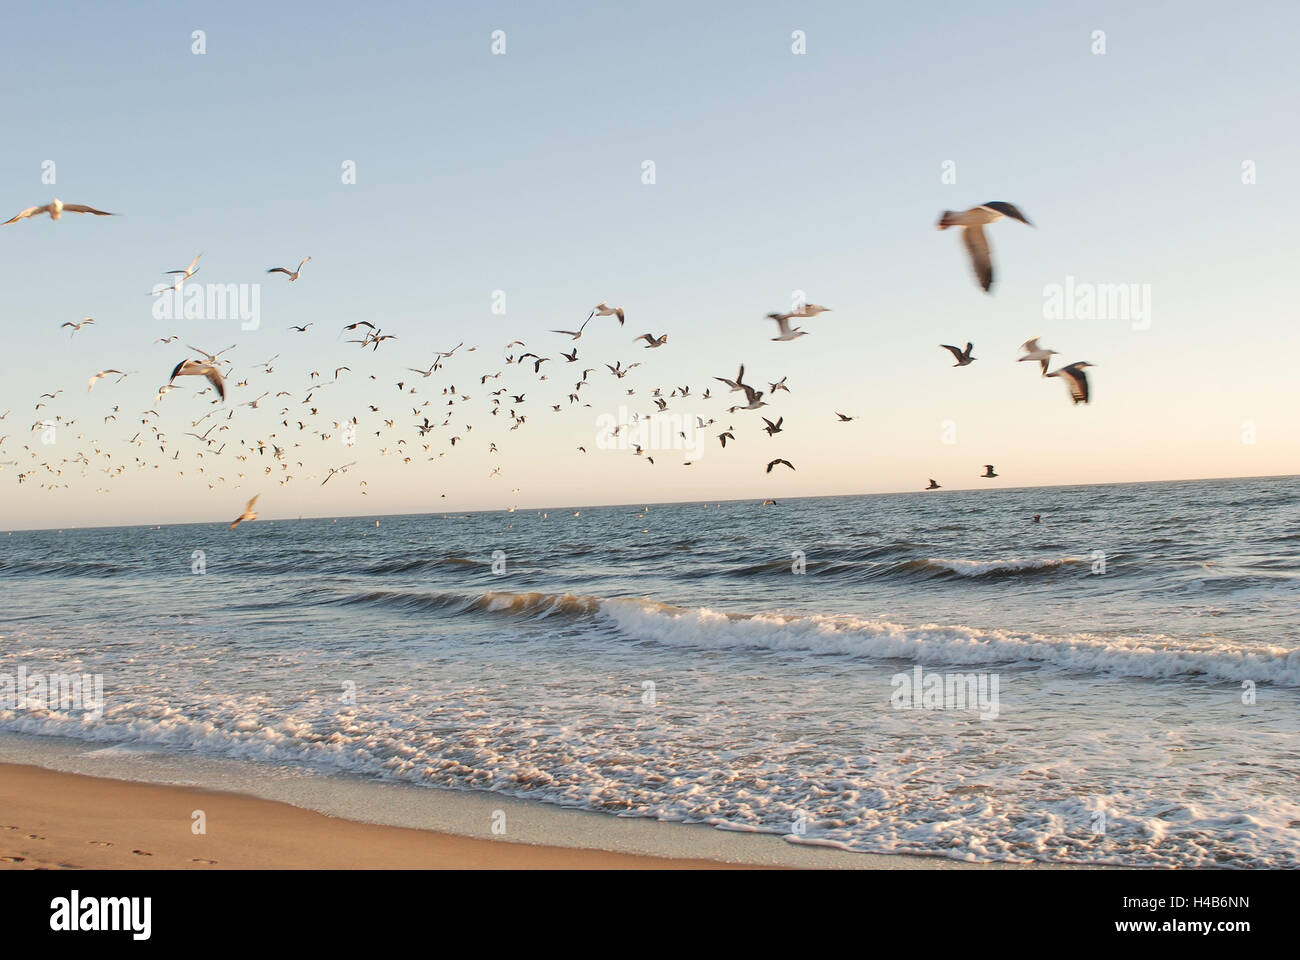 Sea, coast, flock of birds, gulls, flight, animals, birds, flock, sky, beach, shore, many, flying, freedom, free, air, together, wings, flapping of wings, motion, starting, Laridae, flock of gulls, Stock Photo